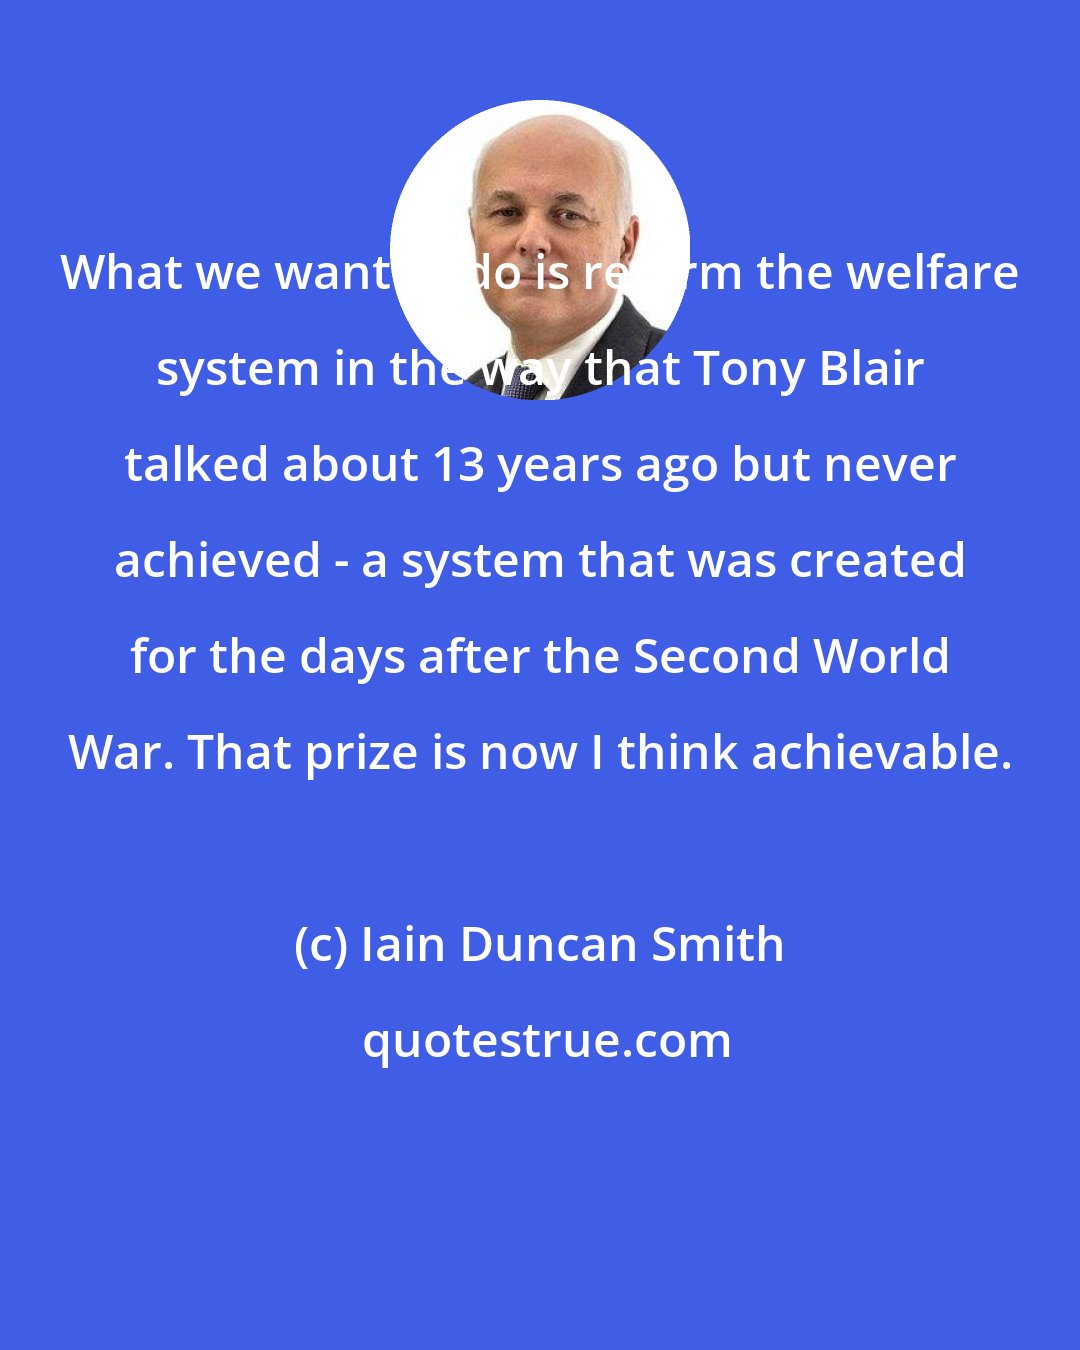 Iain Duncan Smith: What we want to do is reform the welfare system in the way that Tony Blair talked about 13 years ago but never achieved - a system that was created for the days after the Second World War. That prize is now I think achievable.